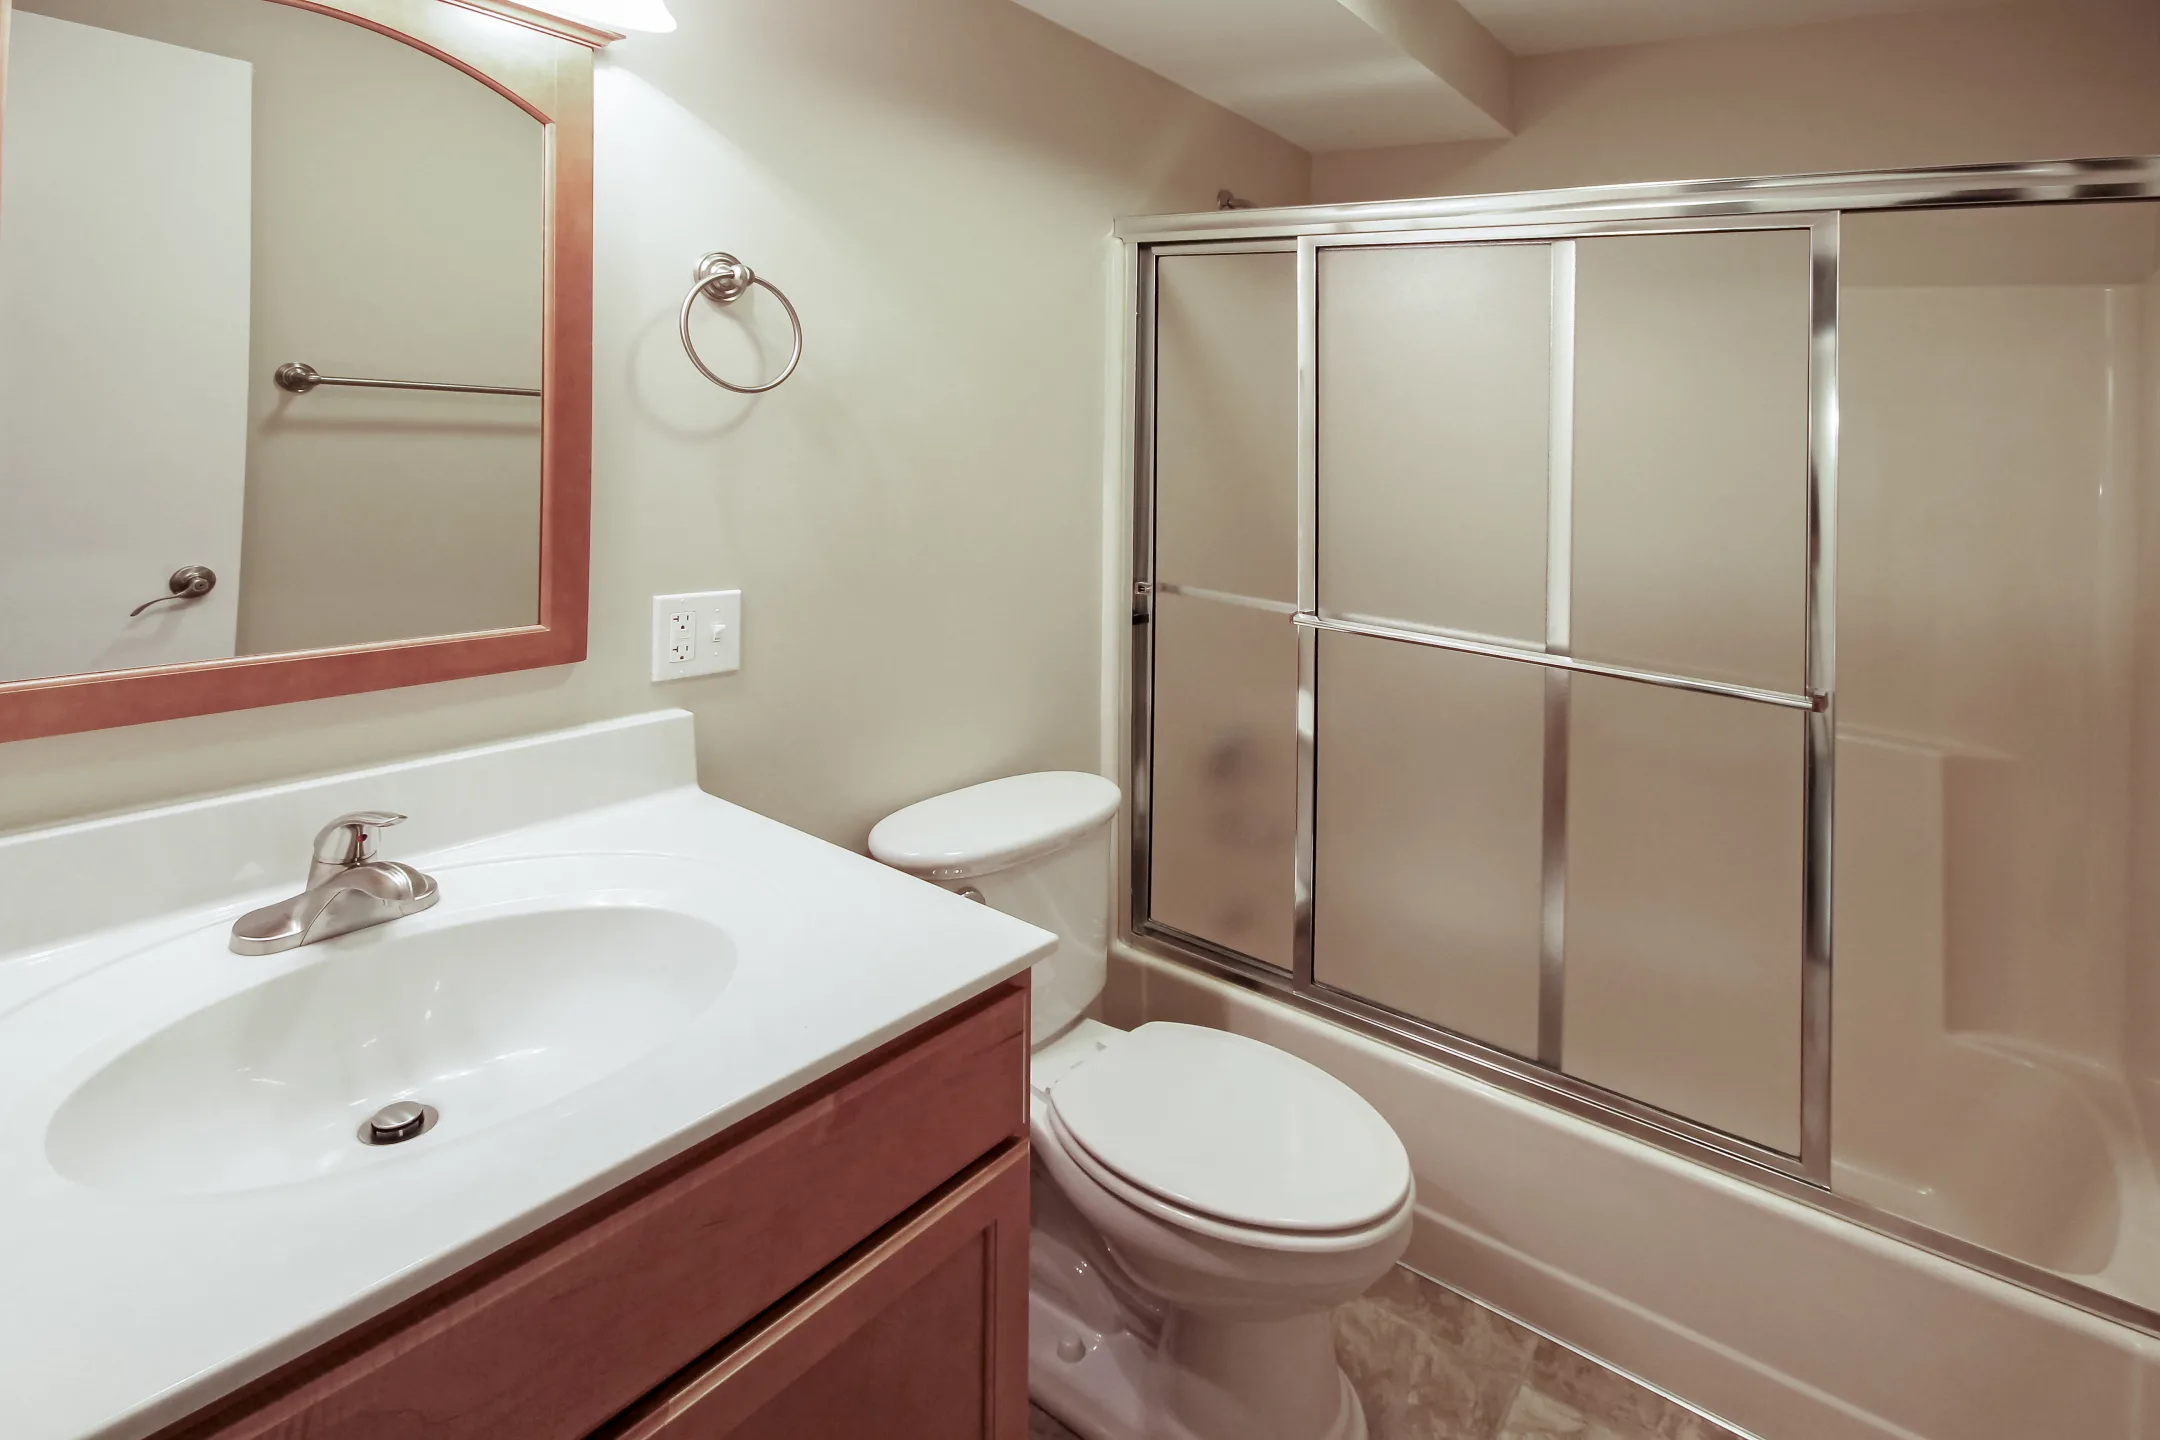 Bathroom - Carriage Hill - Pittsford, NY